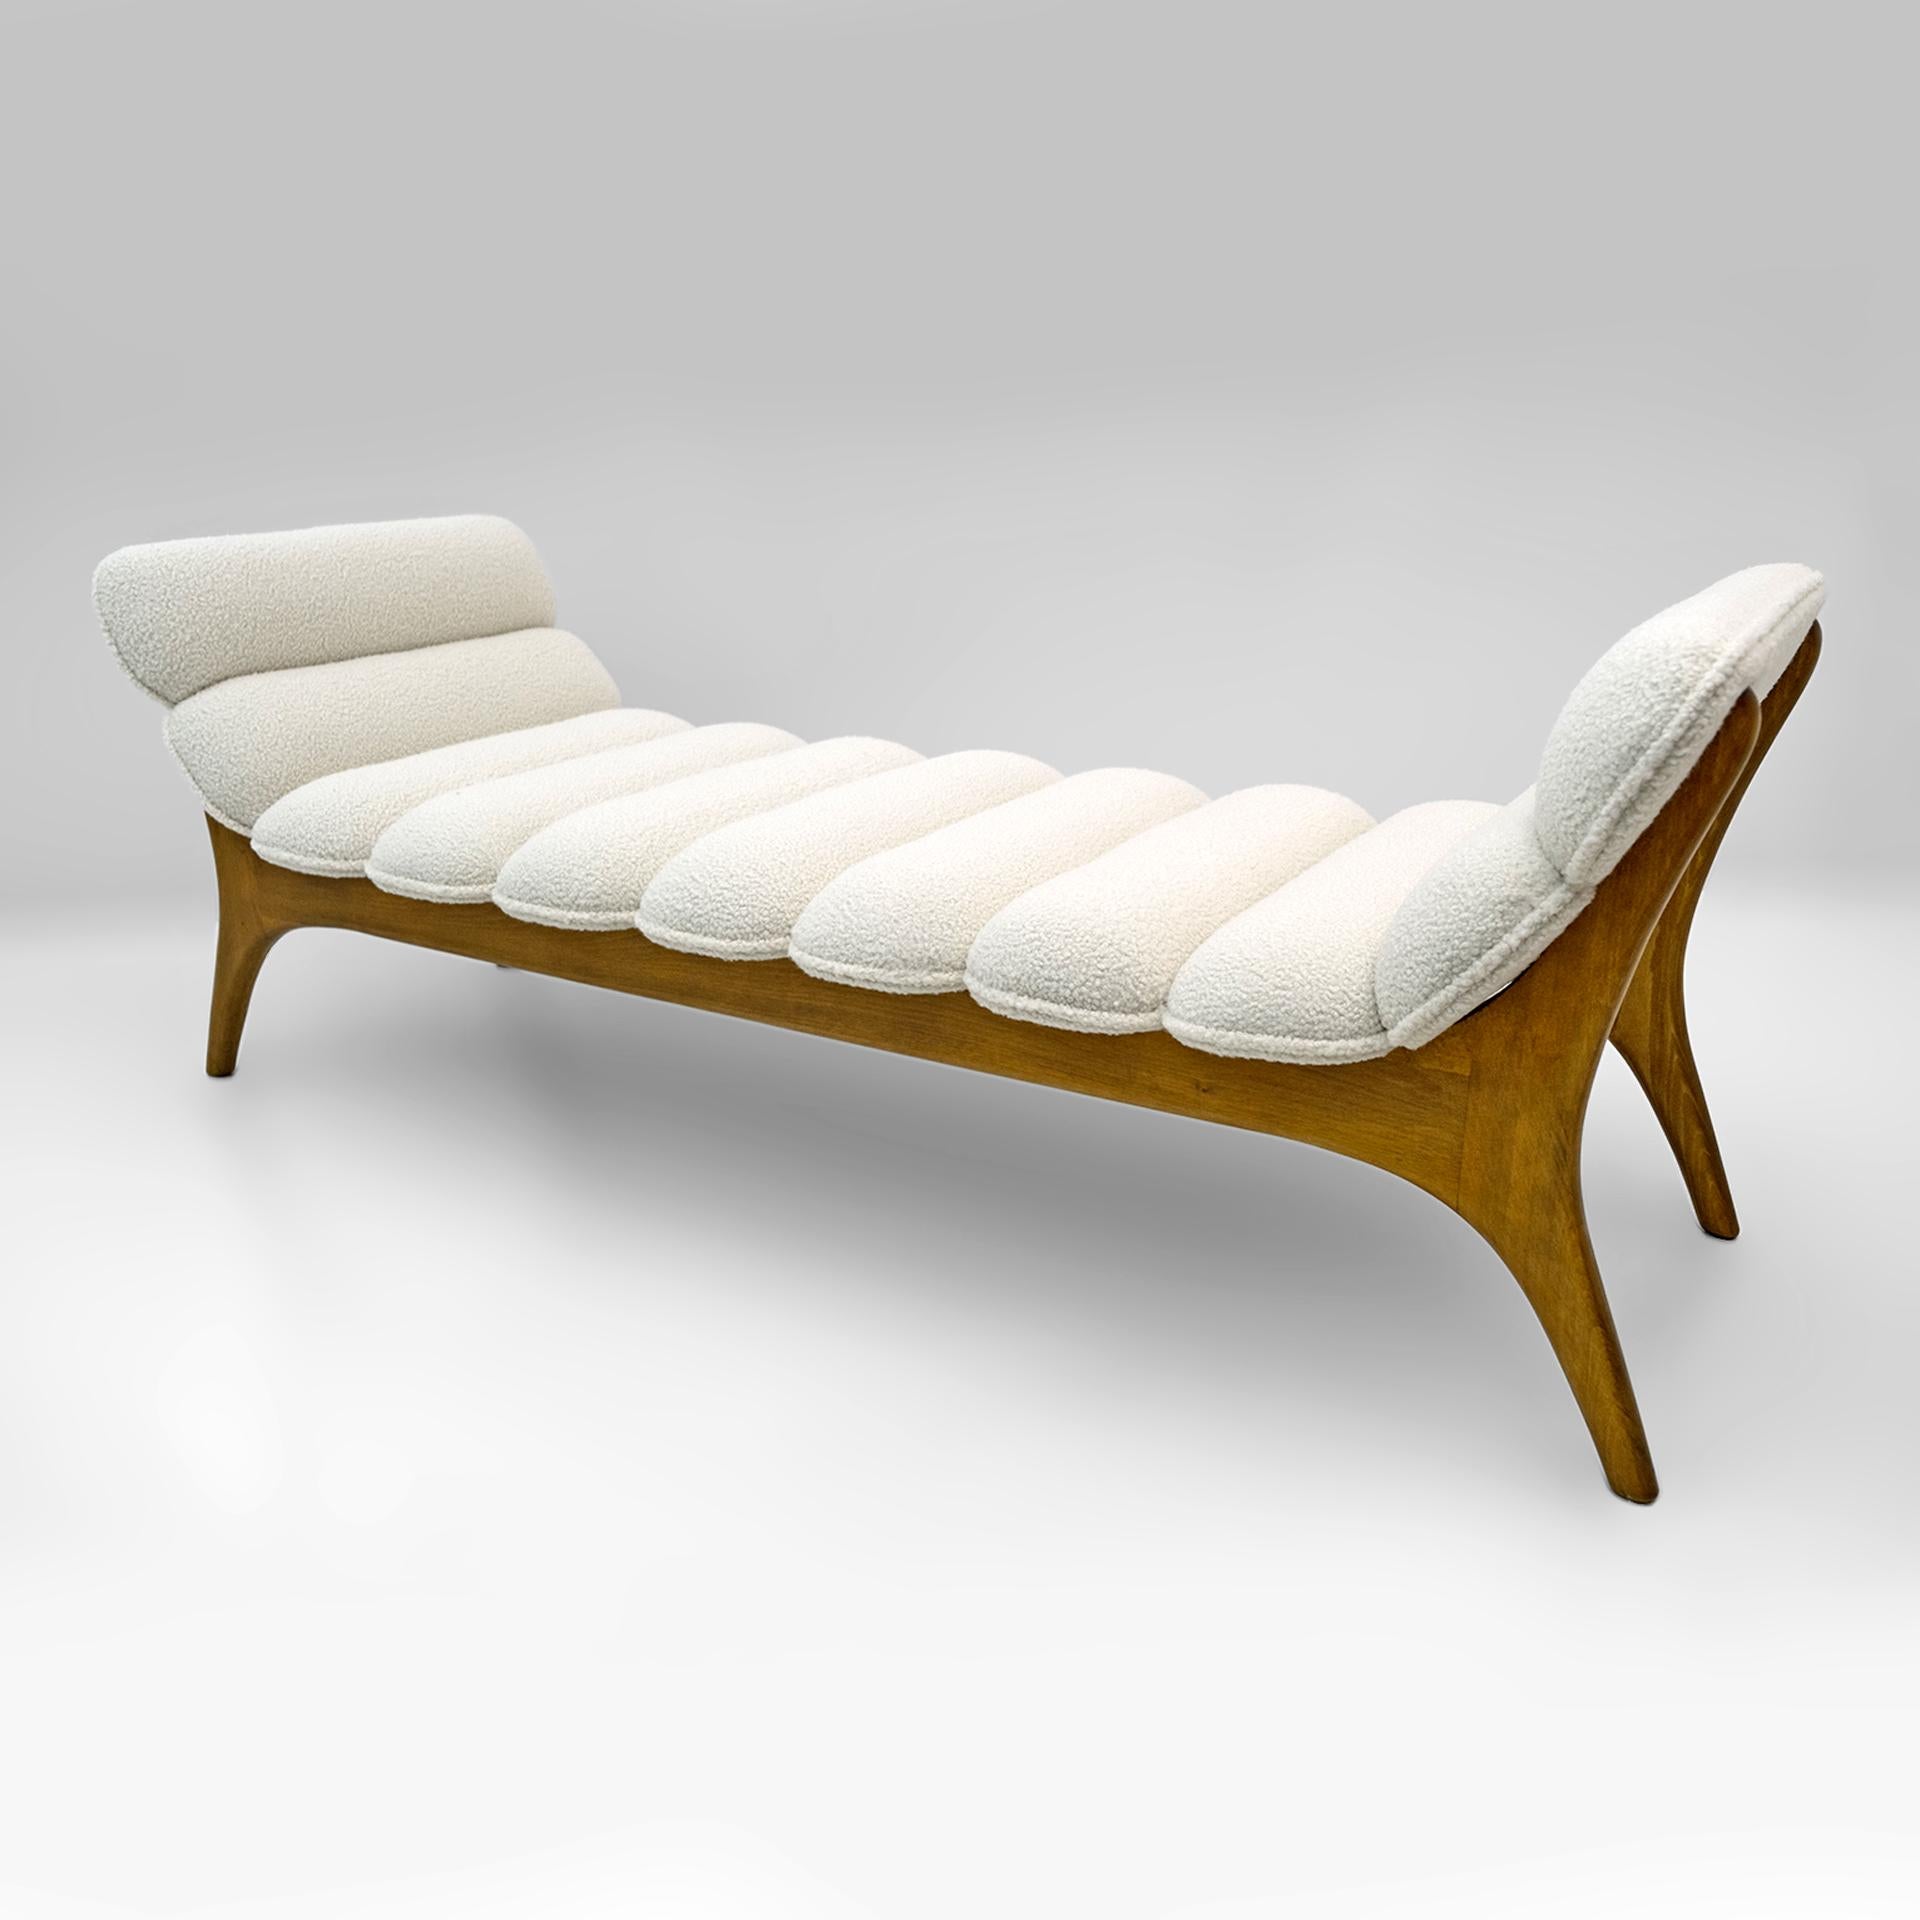 Adrian Pearsall Mid-Century Modern Walnut Chaise Lounge by Craft Associates In Excellent Condition For Sale In Puglia, Puglia